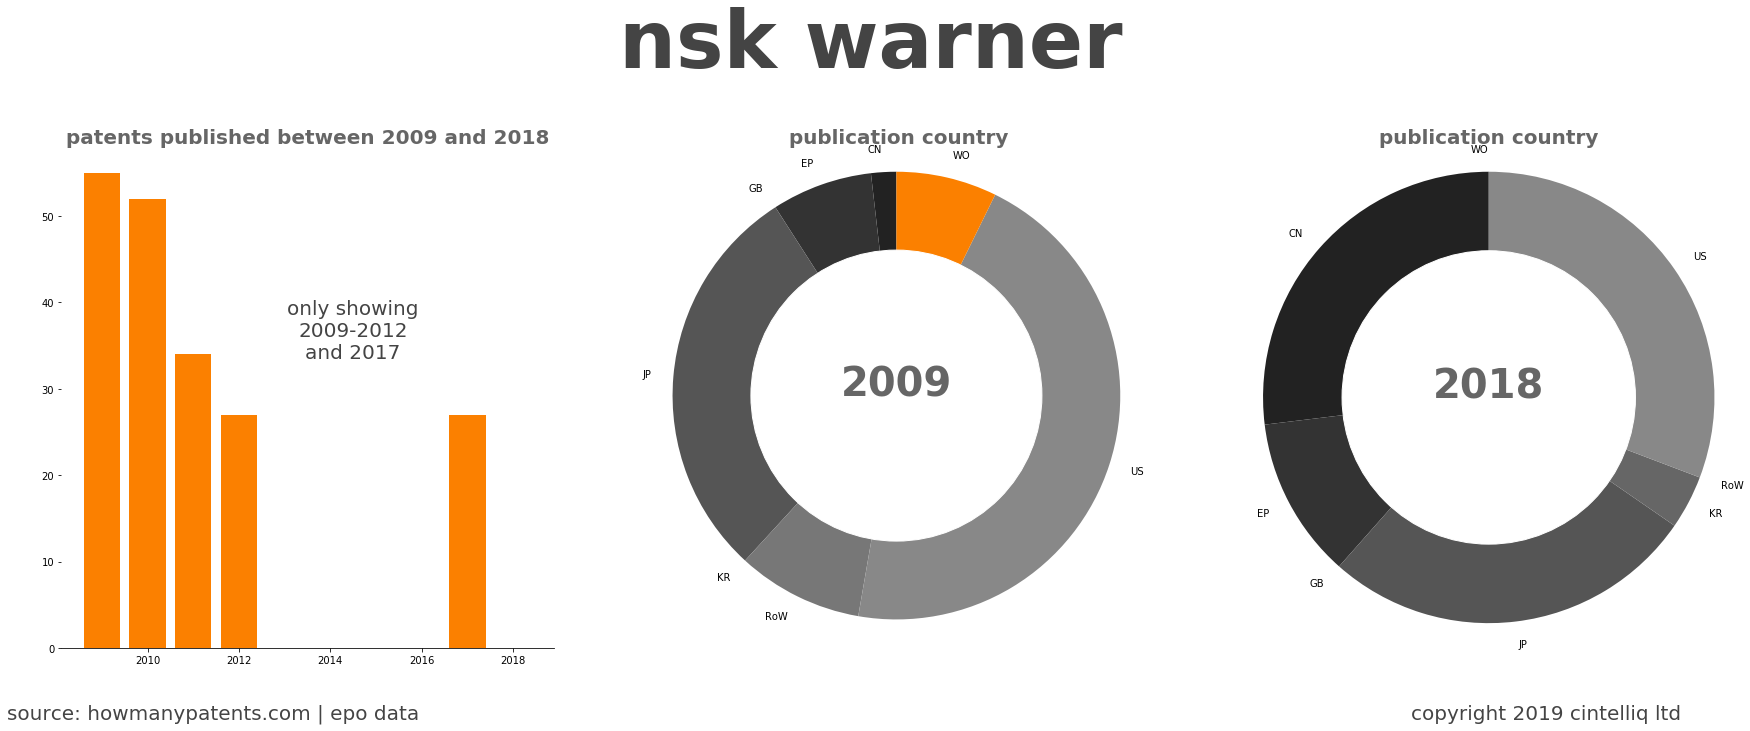 summary of patents for Nsk Warner